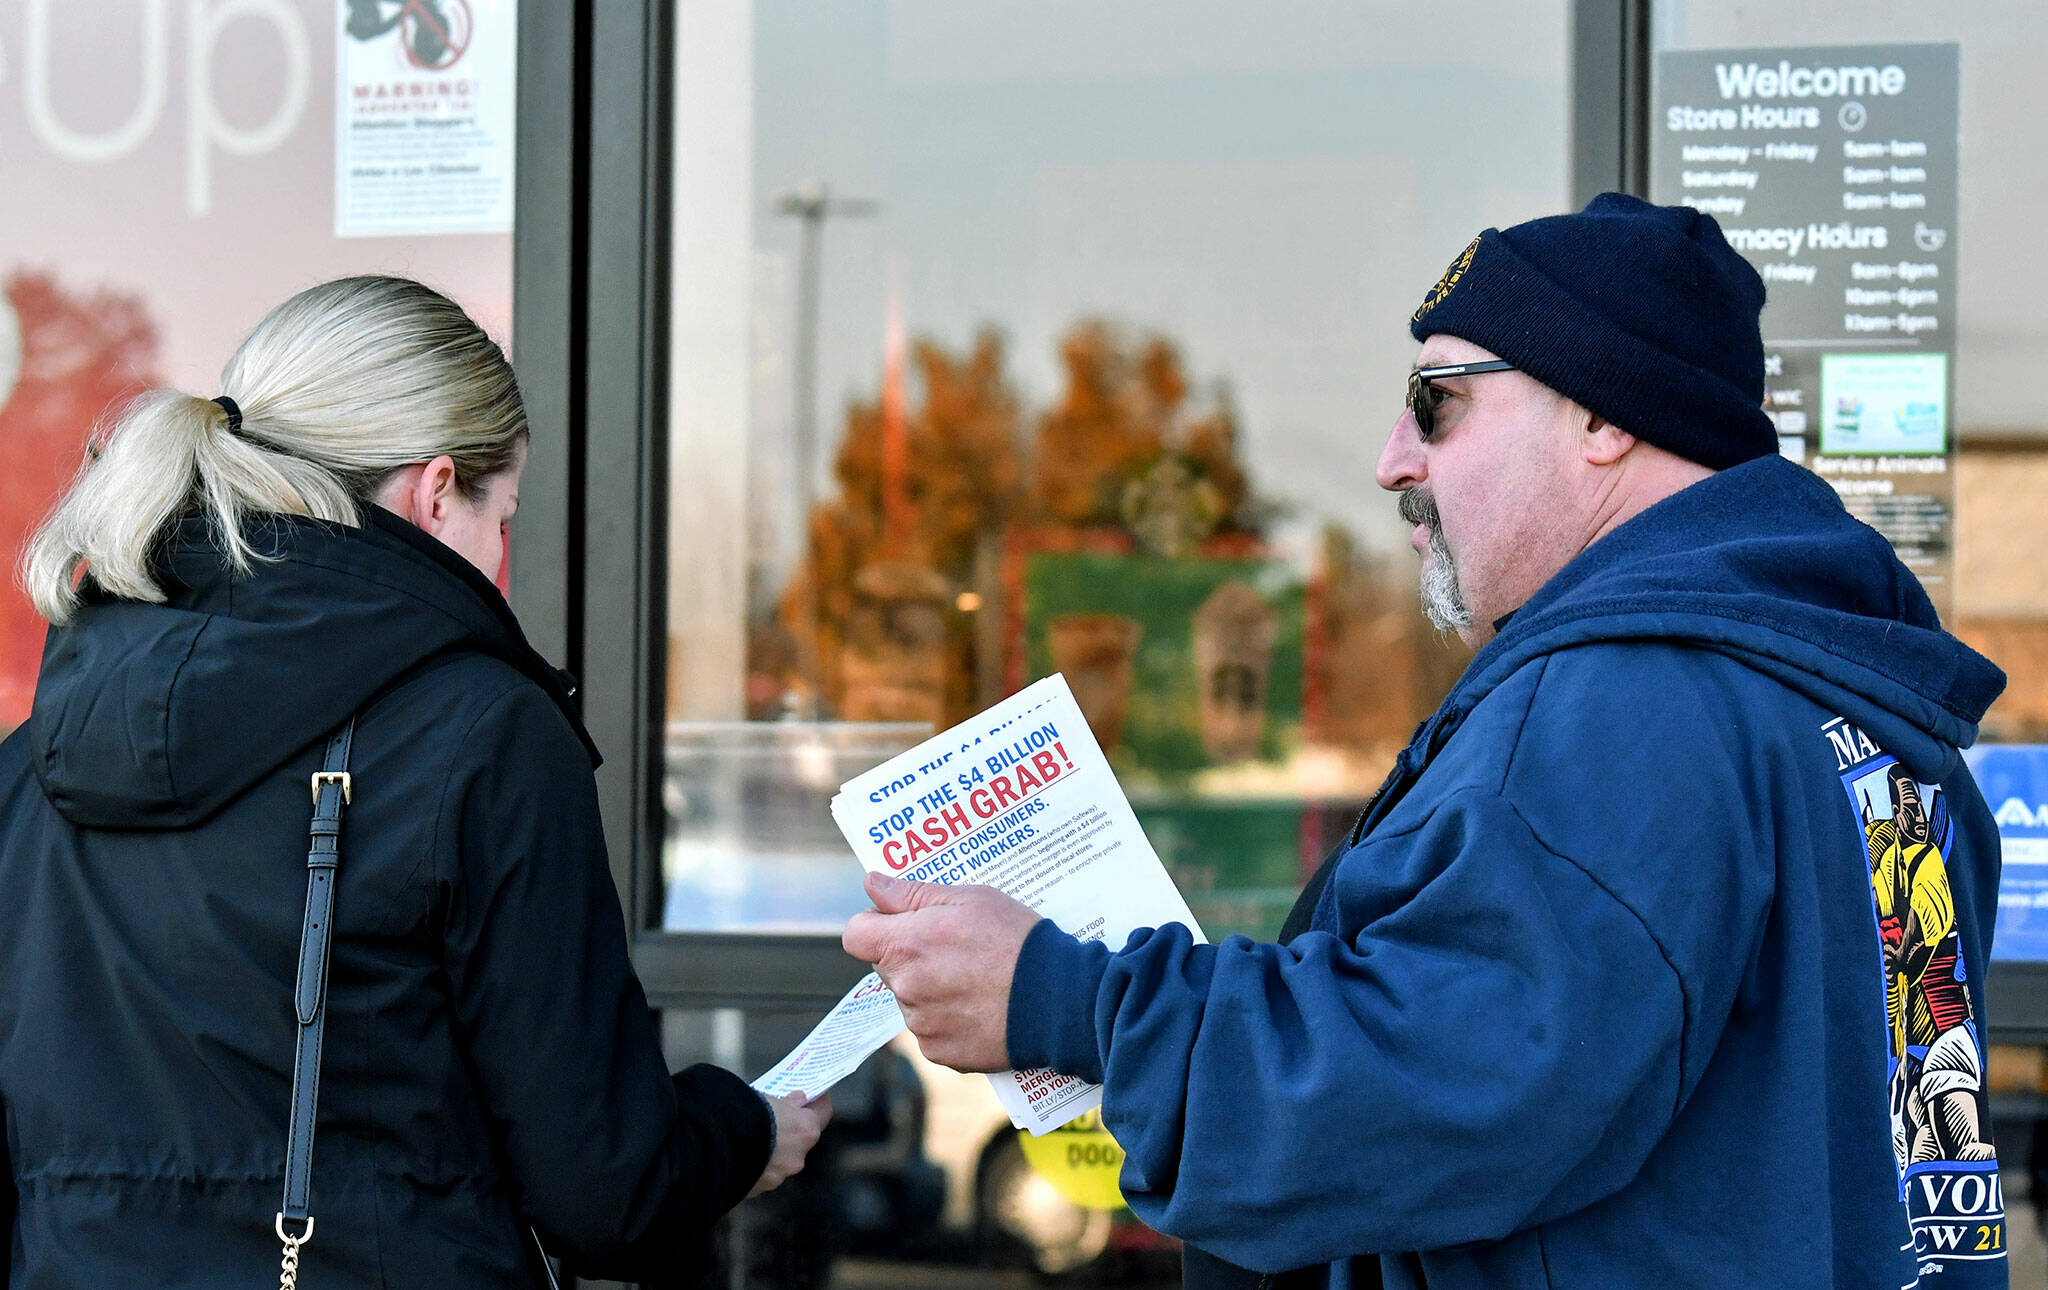 Kevin Flynn, right, a meat-cutter with the Marysville Albertsons, hands a leaflet to a shopper during an informational campaign on Nov. 9, 2022. Flynn was one of about a dozen grocery store workers handing out leaflets to shoppers about the proposed merger between Albertsons and Kroger. (Mike Henneke / The Herald)